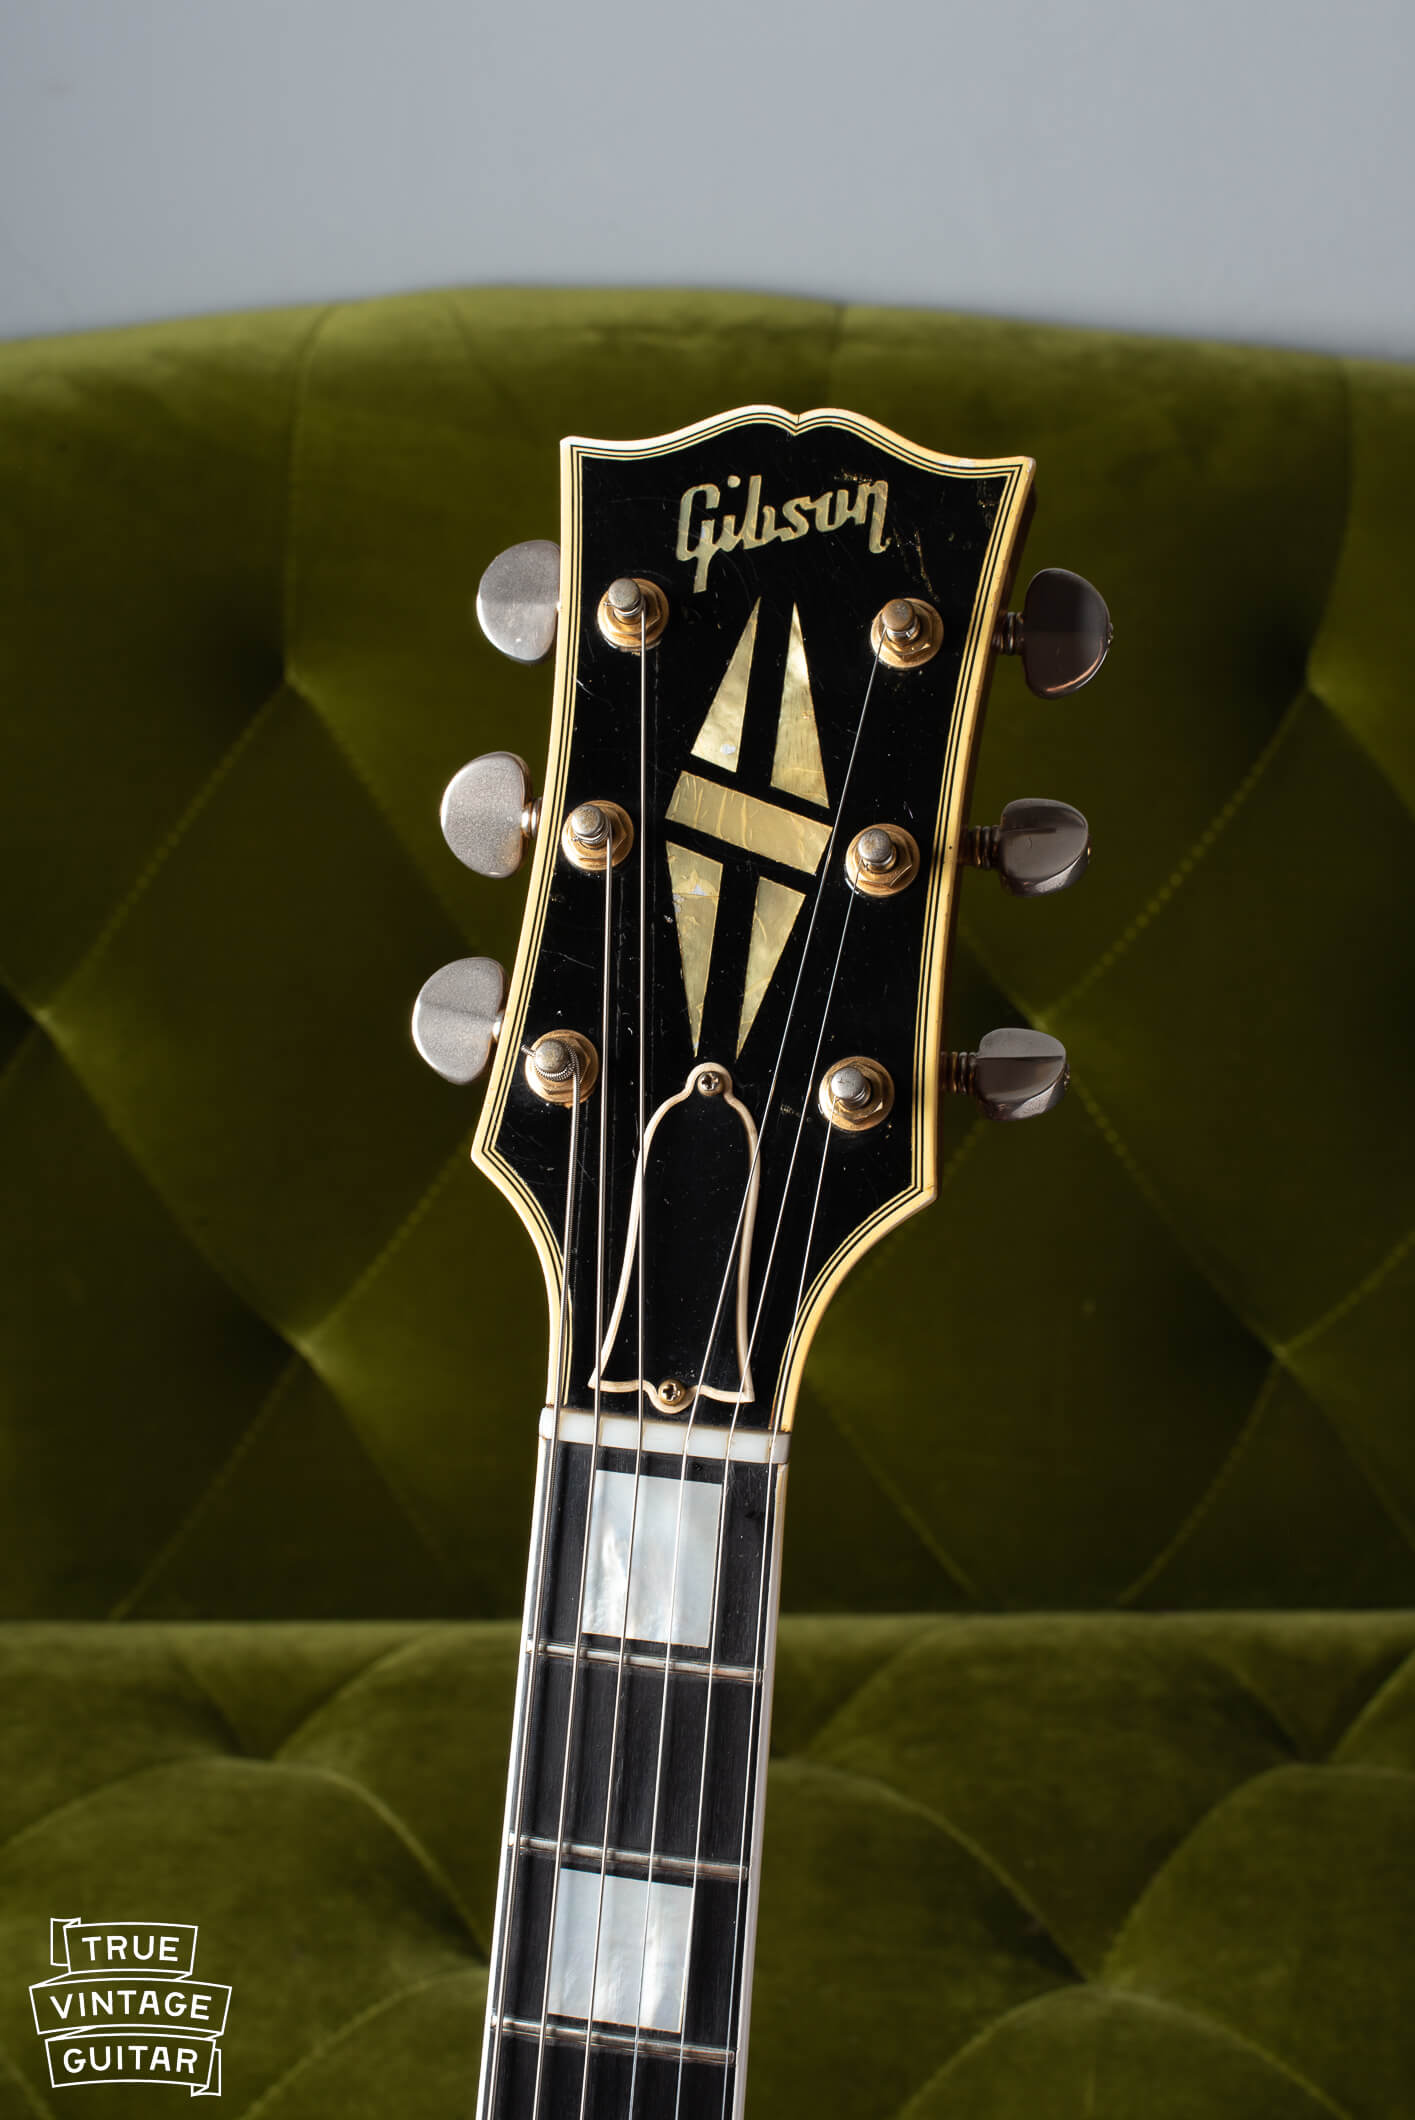 1959 Gibson ES-355 headstock with pearl inlay